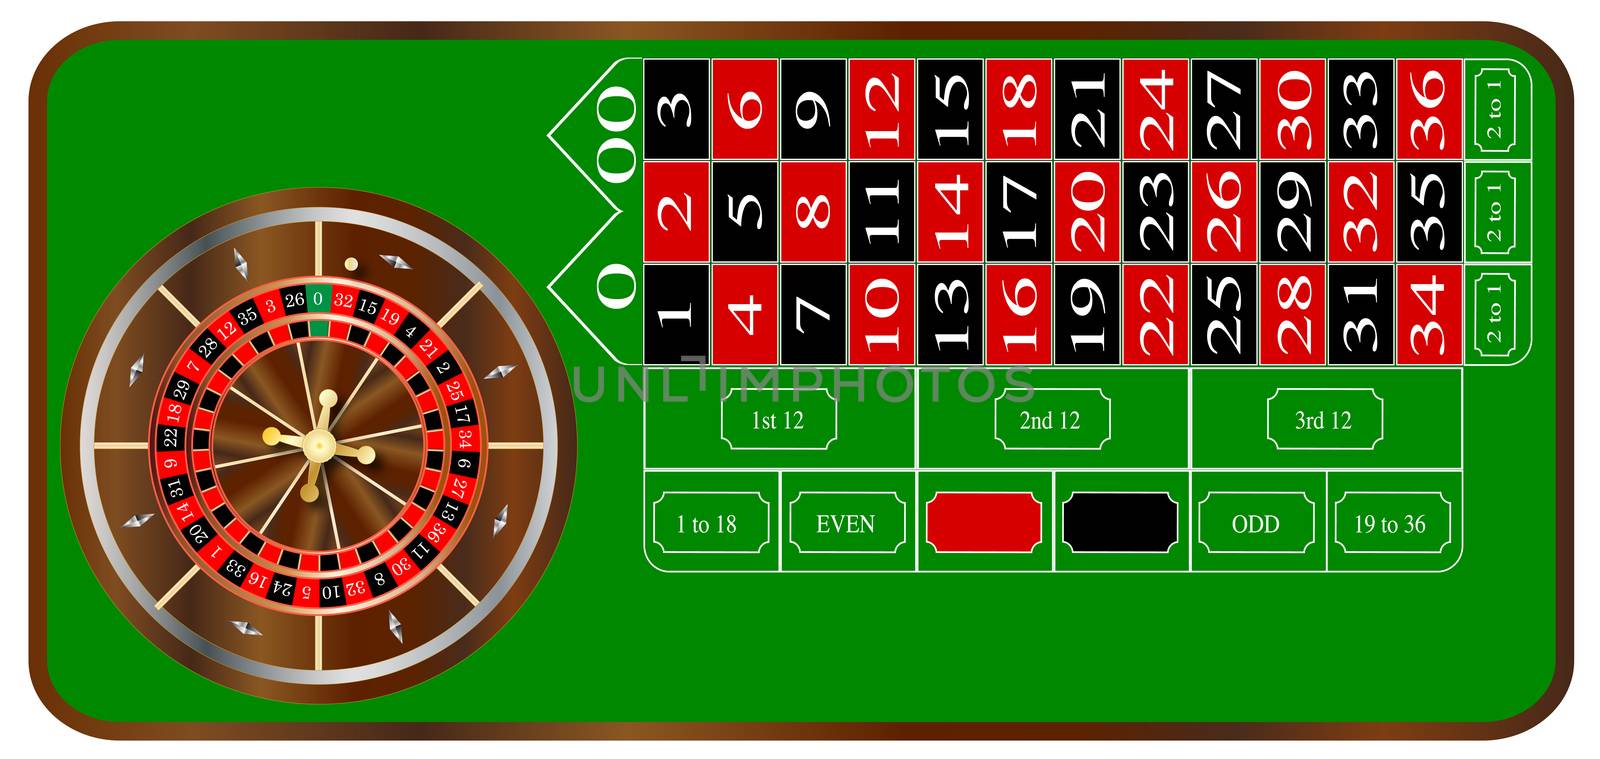 A typical American roulette table layout over a white background